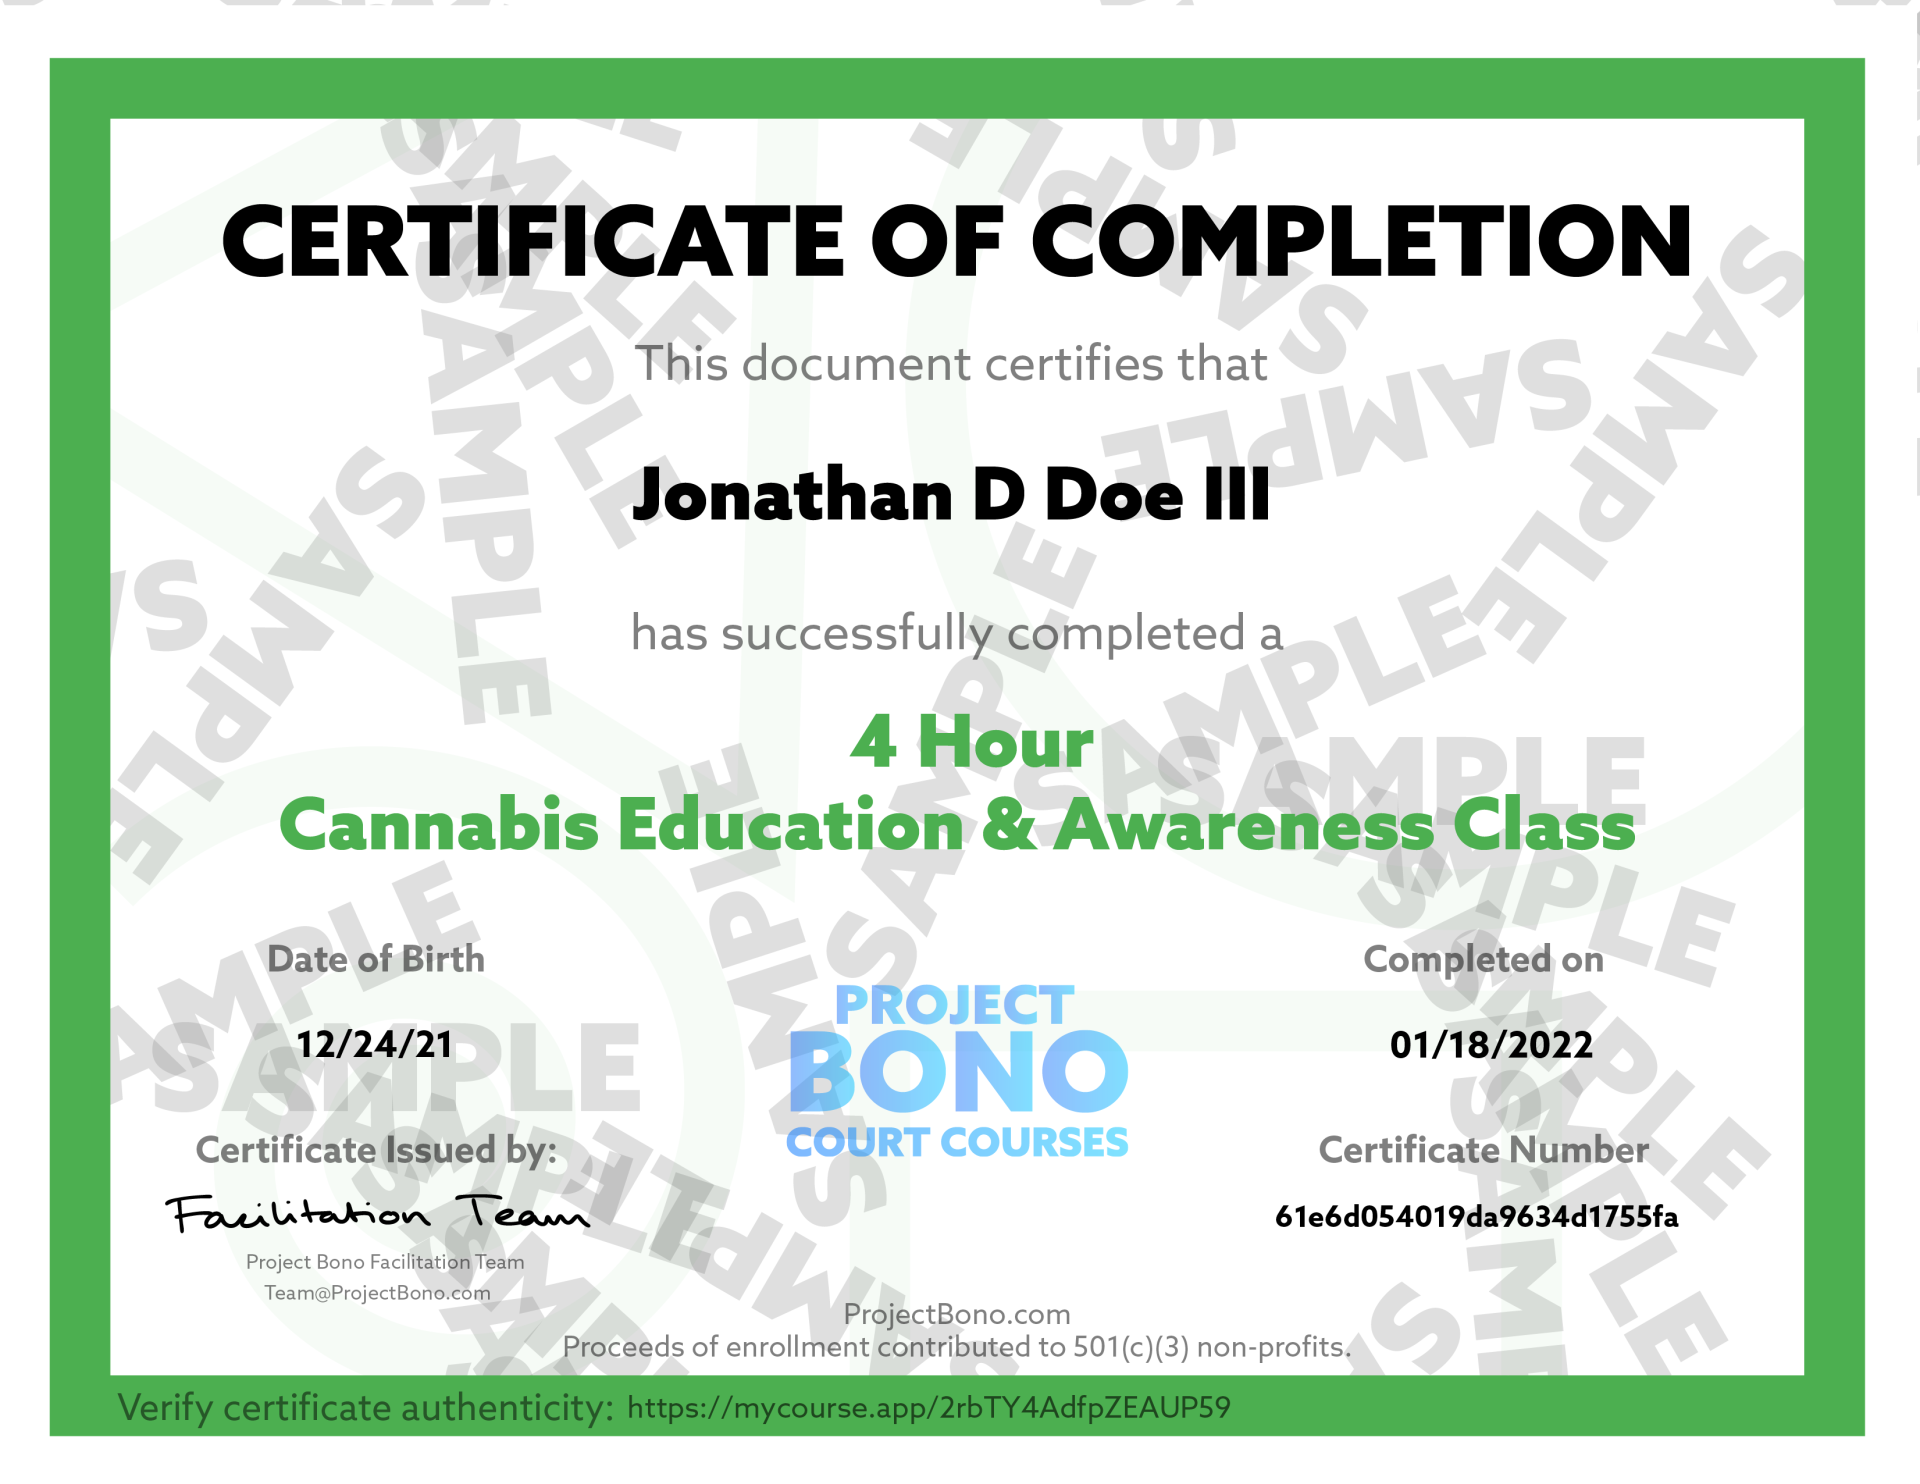 Sample Certificate of Completion for Project Bono court-ordered cannabis course